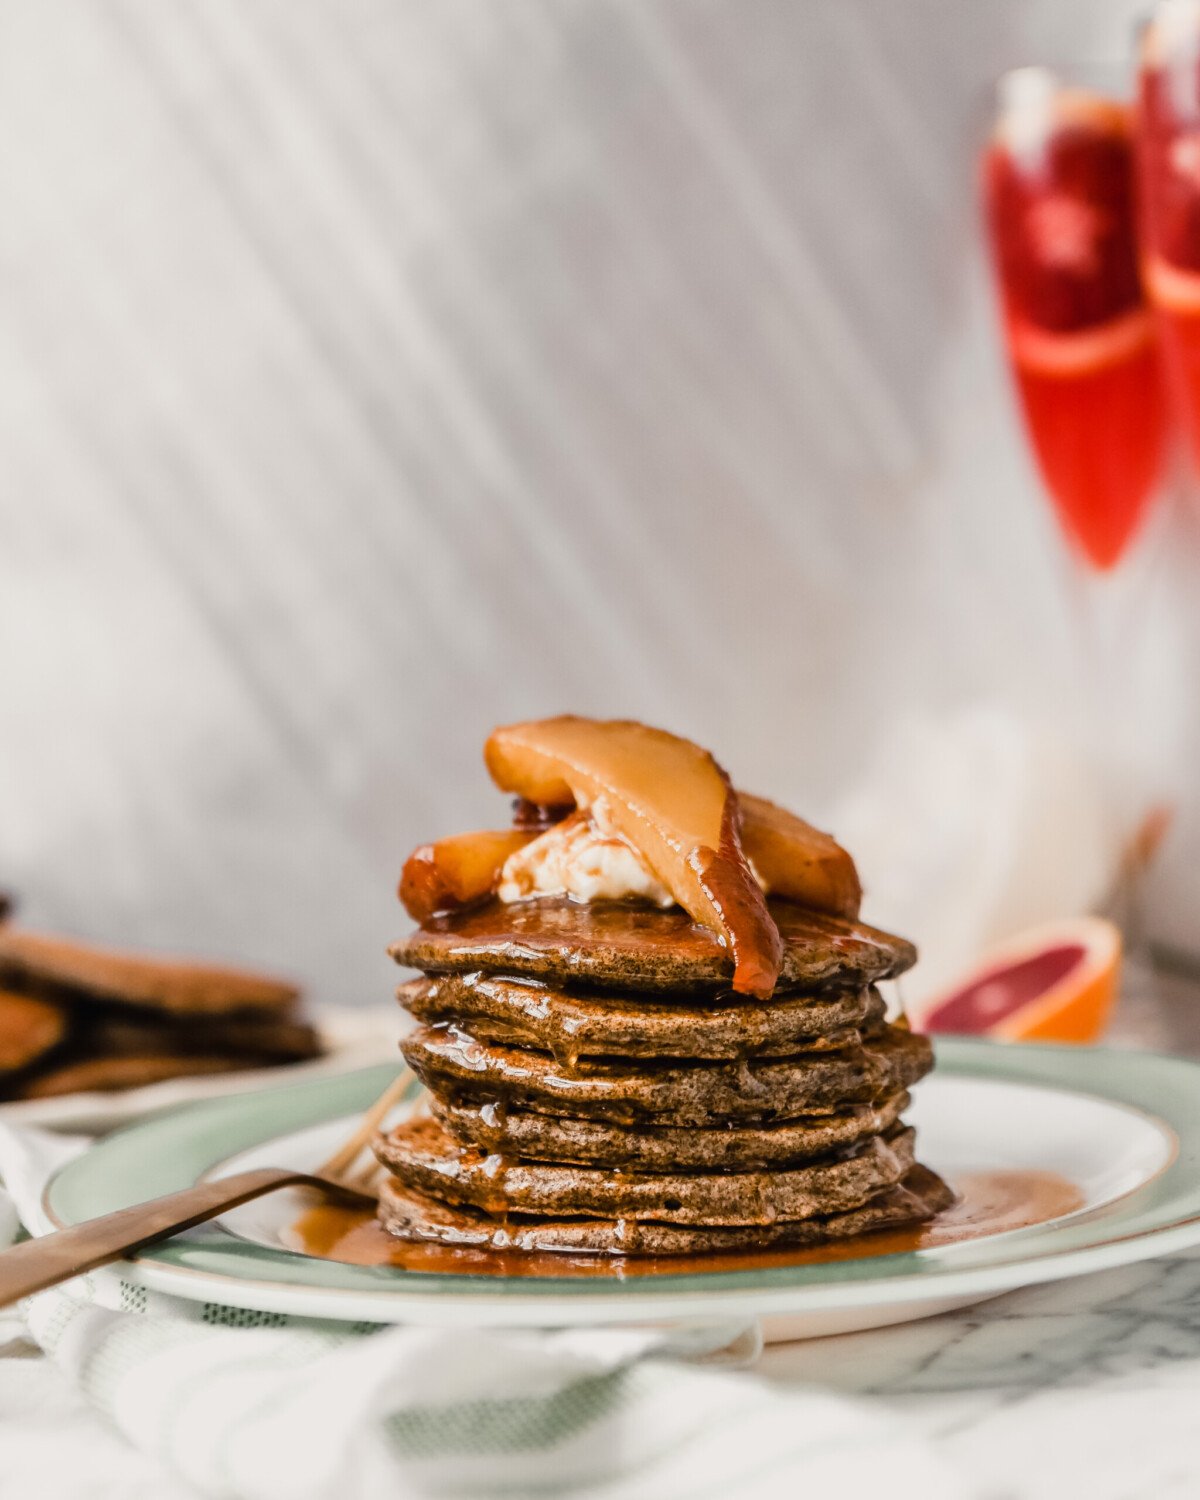 Photograph of a stack of pancakes with maple syrup dripping down them.